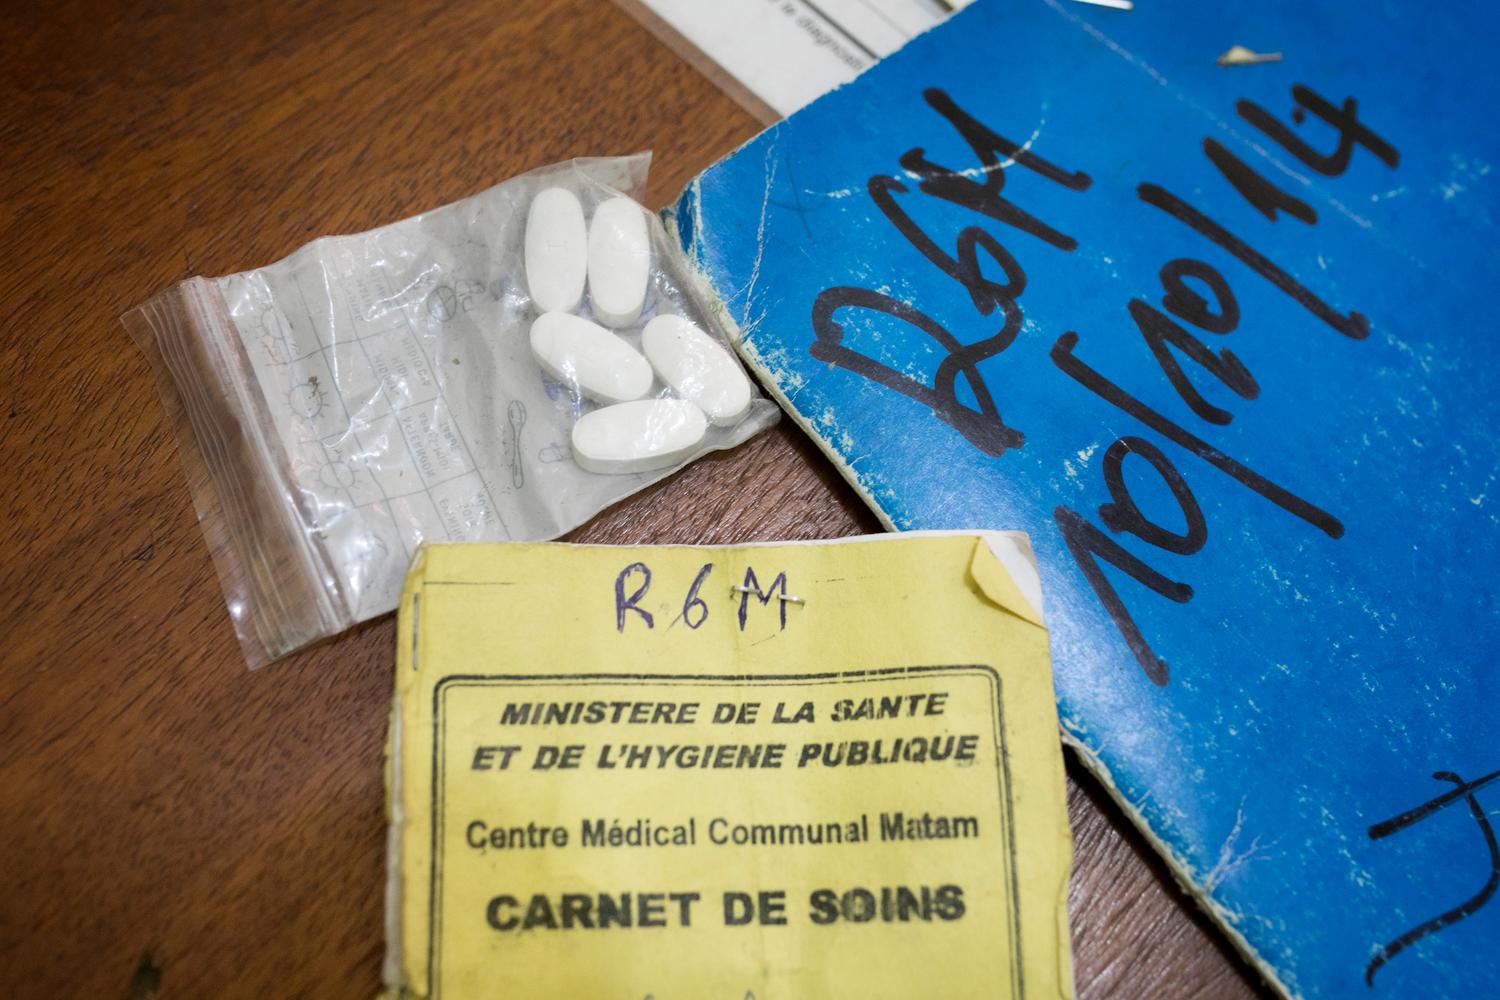 During an R6M (Rendez-vous de Six Mois), an MSF-developed model of care whereby stable HIV patients have appointments every six months instead of the standard 1-2 months. Guinea, July 2018.  